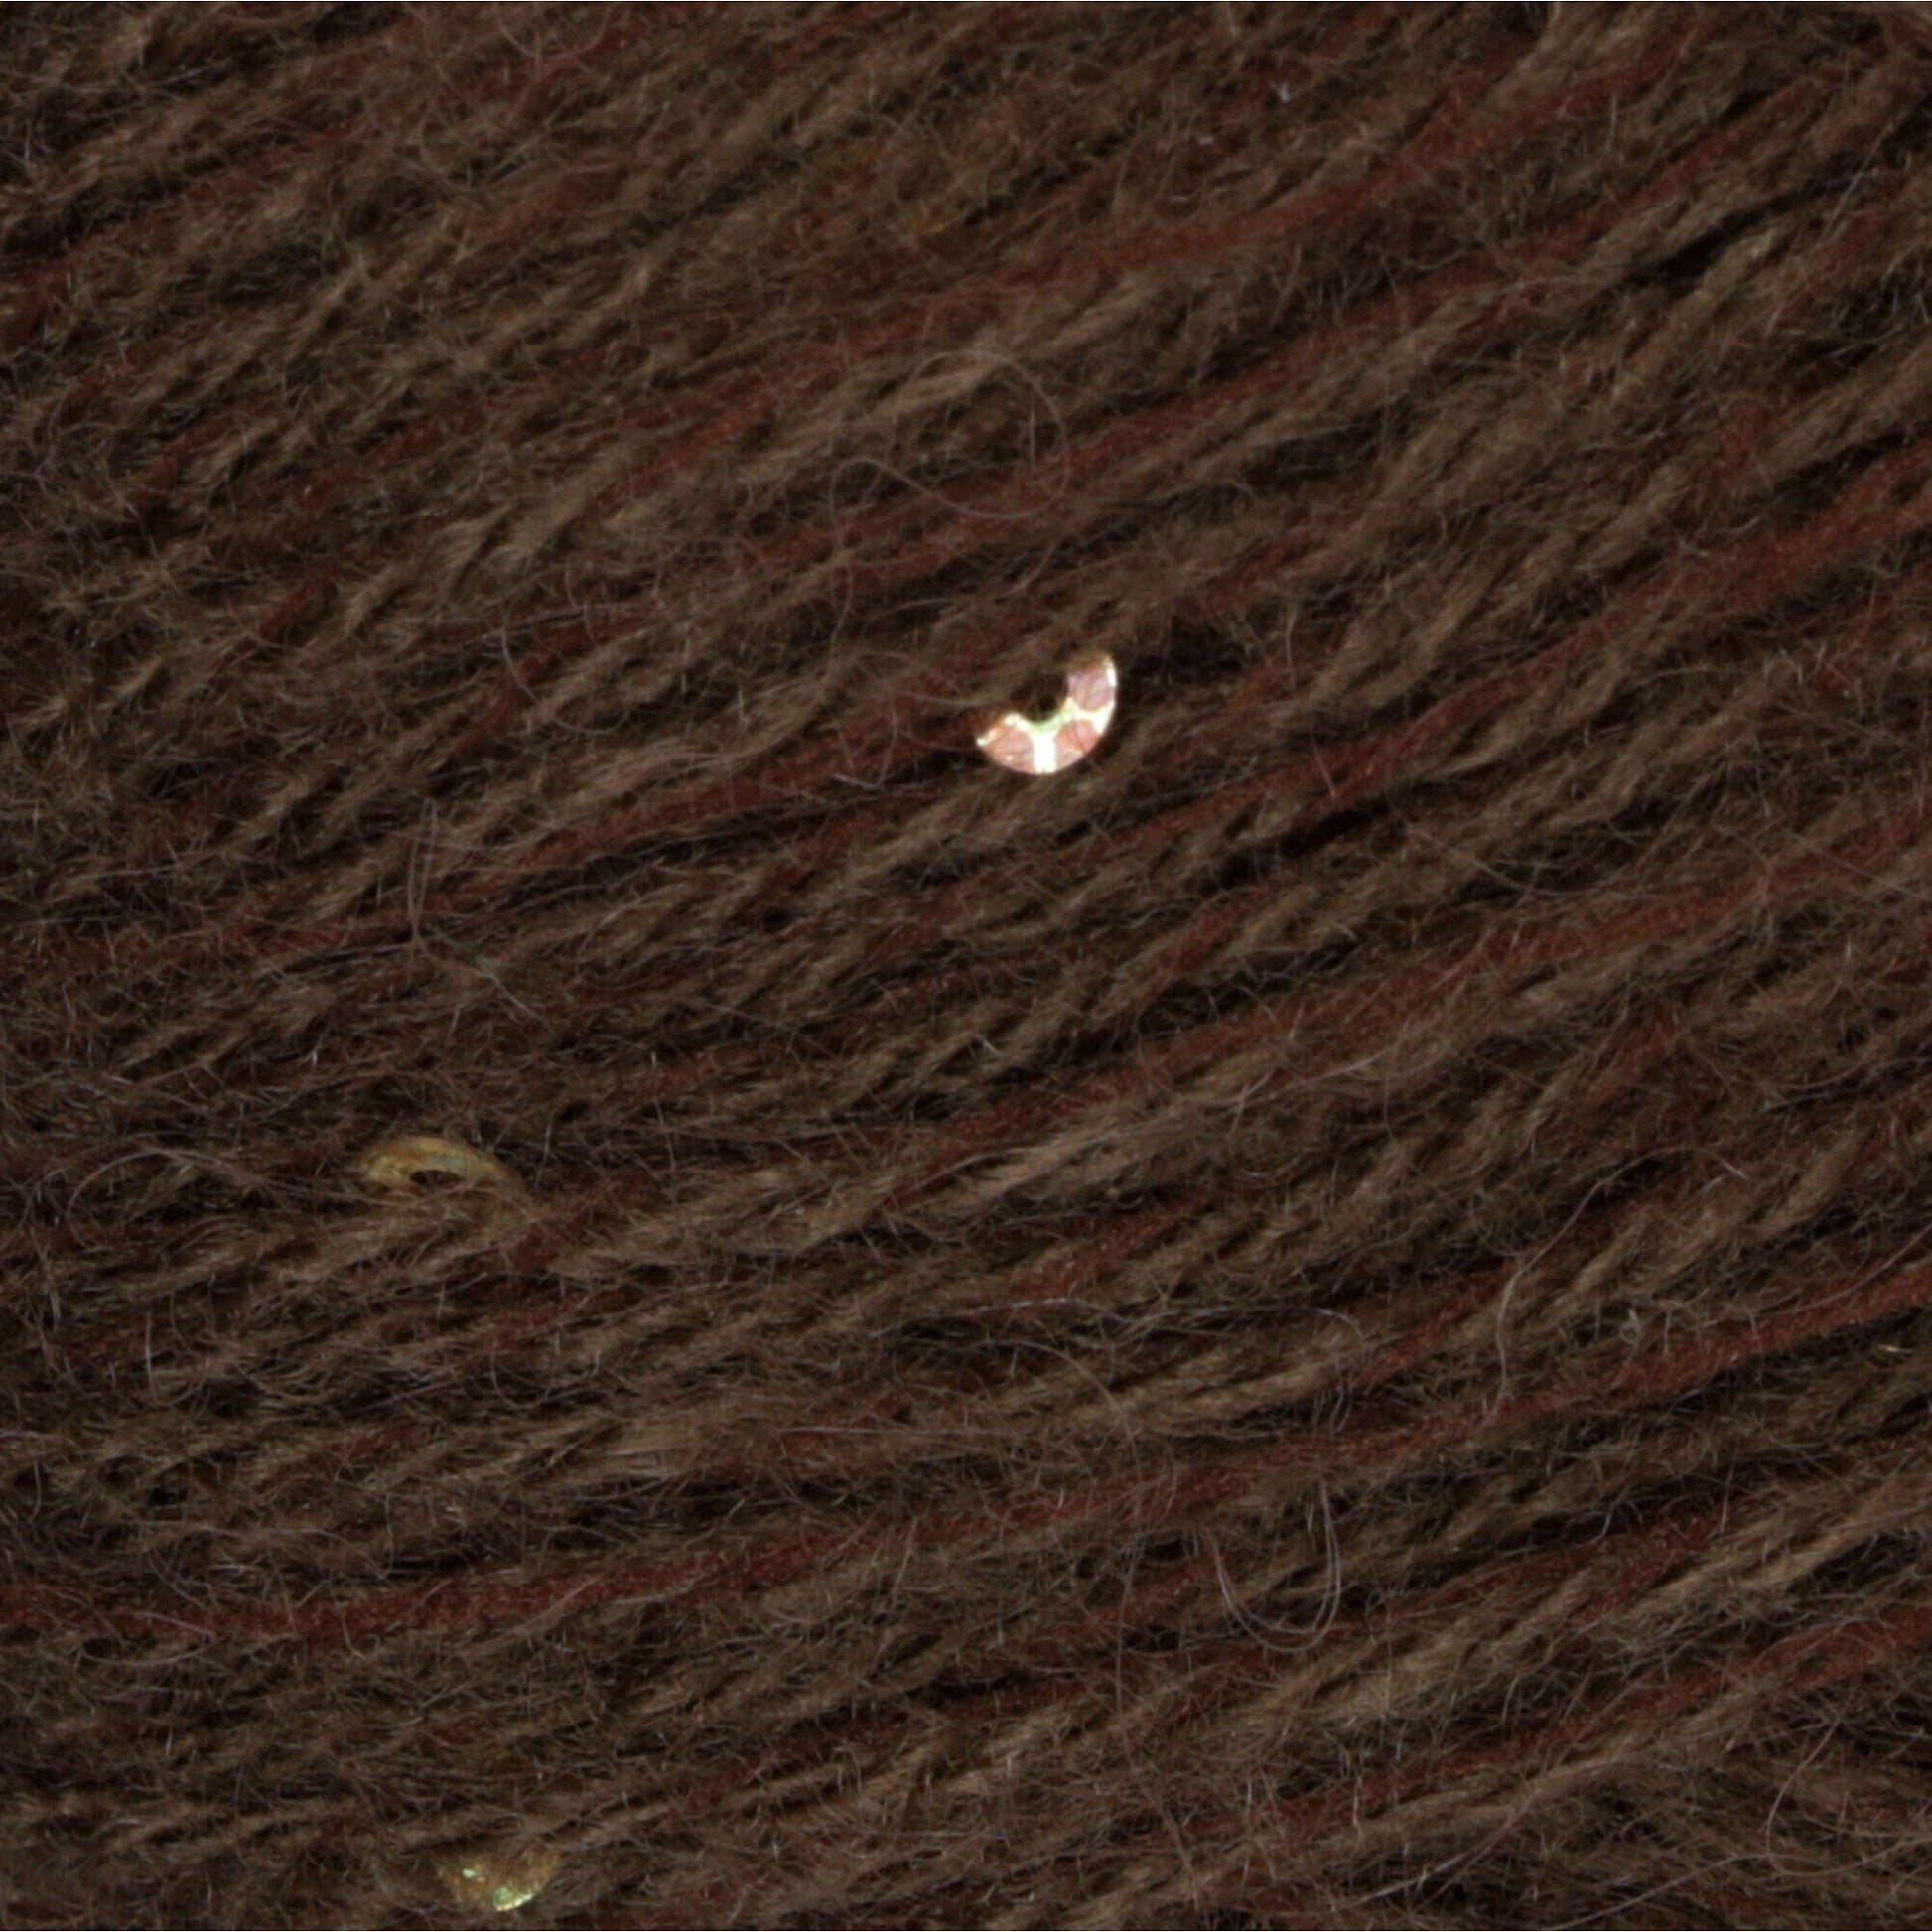 Patons Lace Sequin Yarn - Discontinued